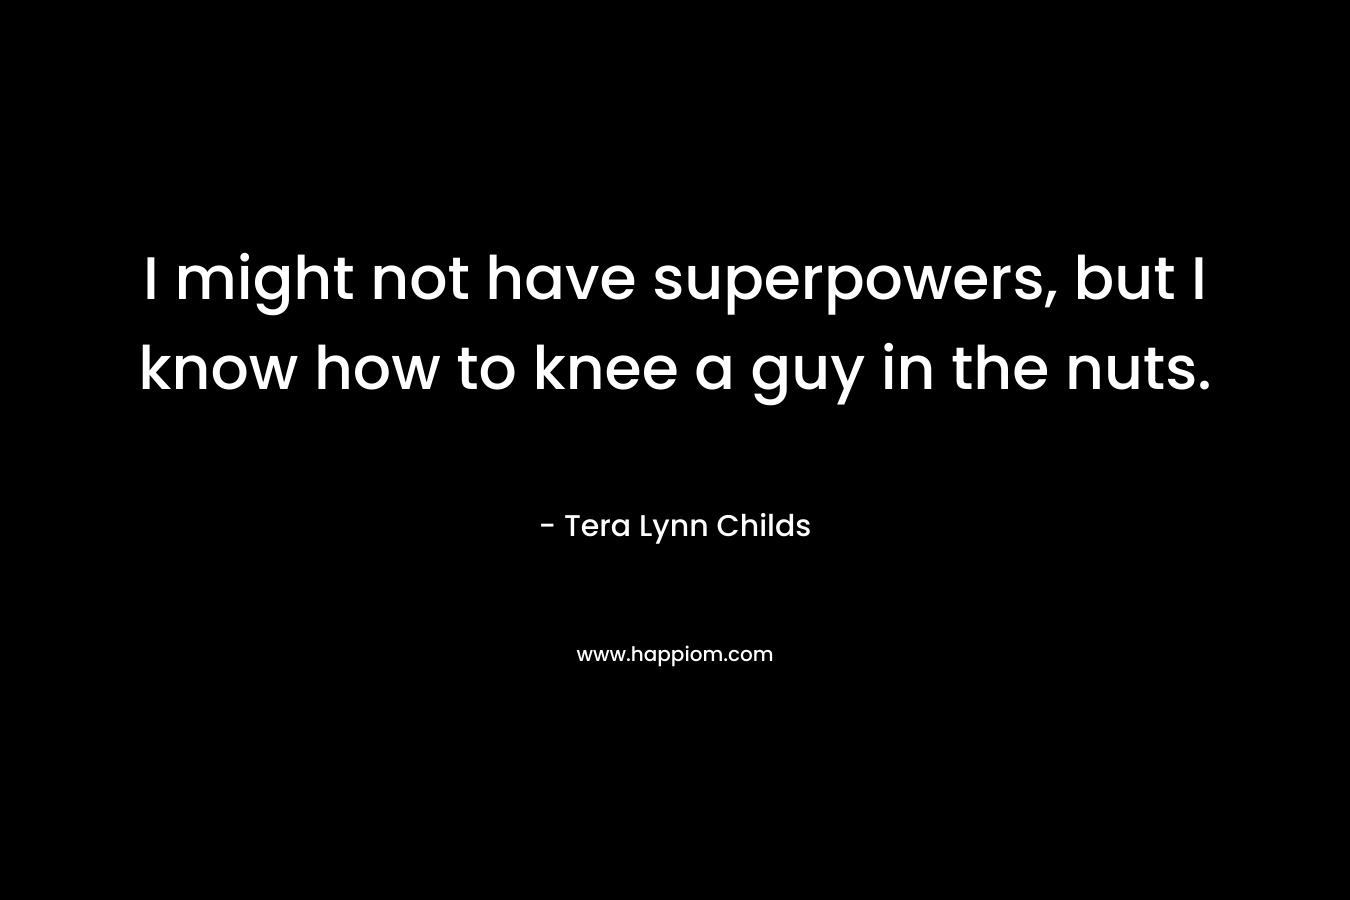 I might not have superpowers, but I know how to knee a guy in the nuts.